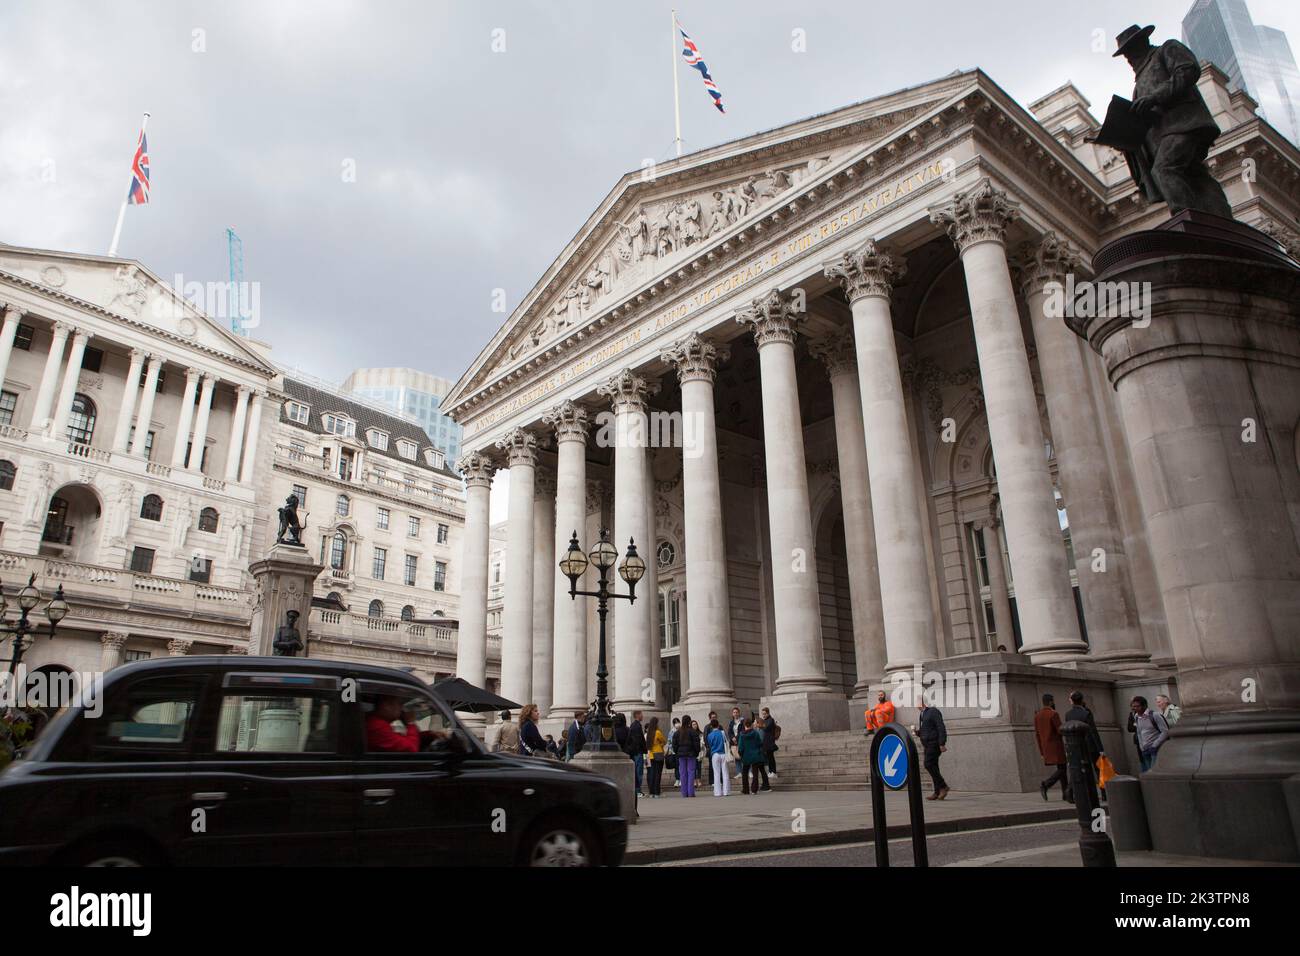 London, UK, 28 September 2022: Stormy skies over the Bank of England (left) in the heart of the City of London financial district. The Bank of England has taken emergency steps to calm the market for pounds sterling after Kwasi Kwateng's controversial mini-budget. Anna Watson/Alamy Live News Stock Photo